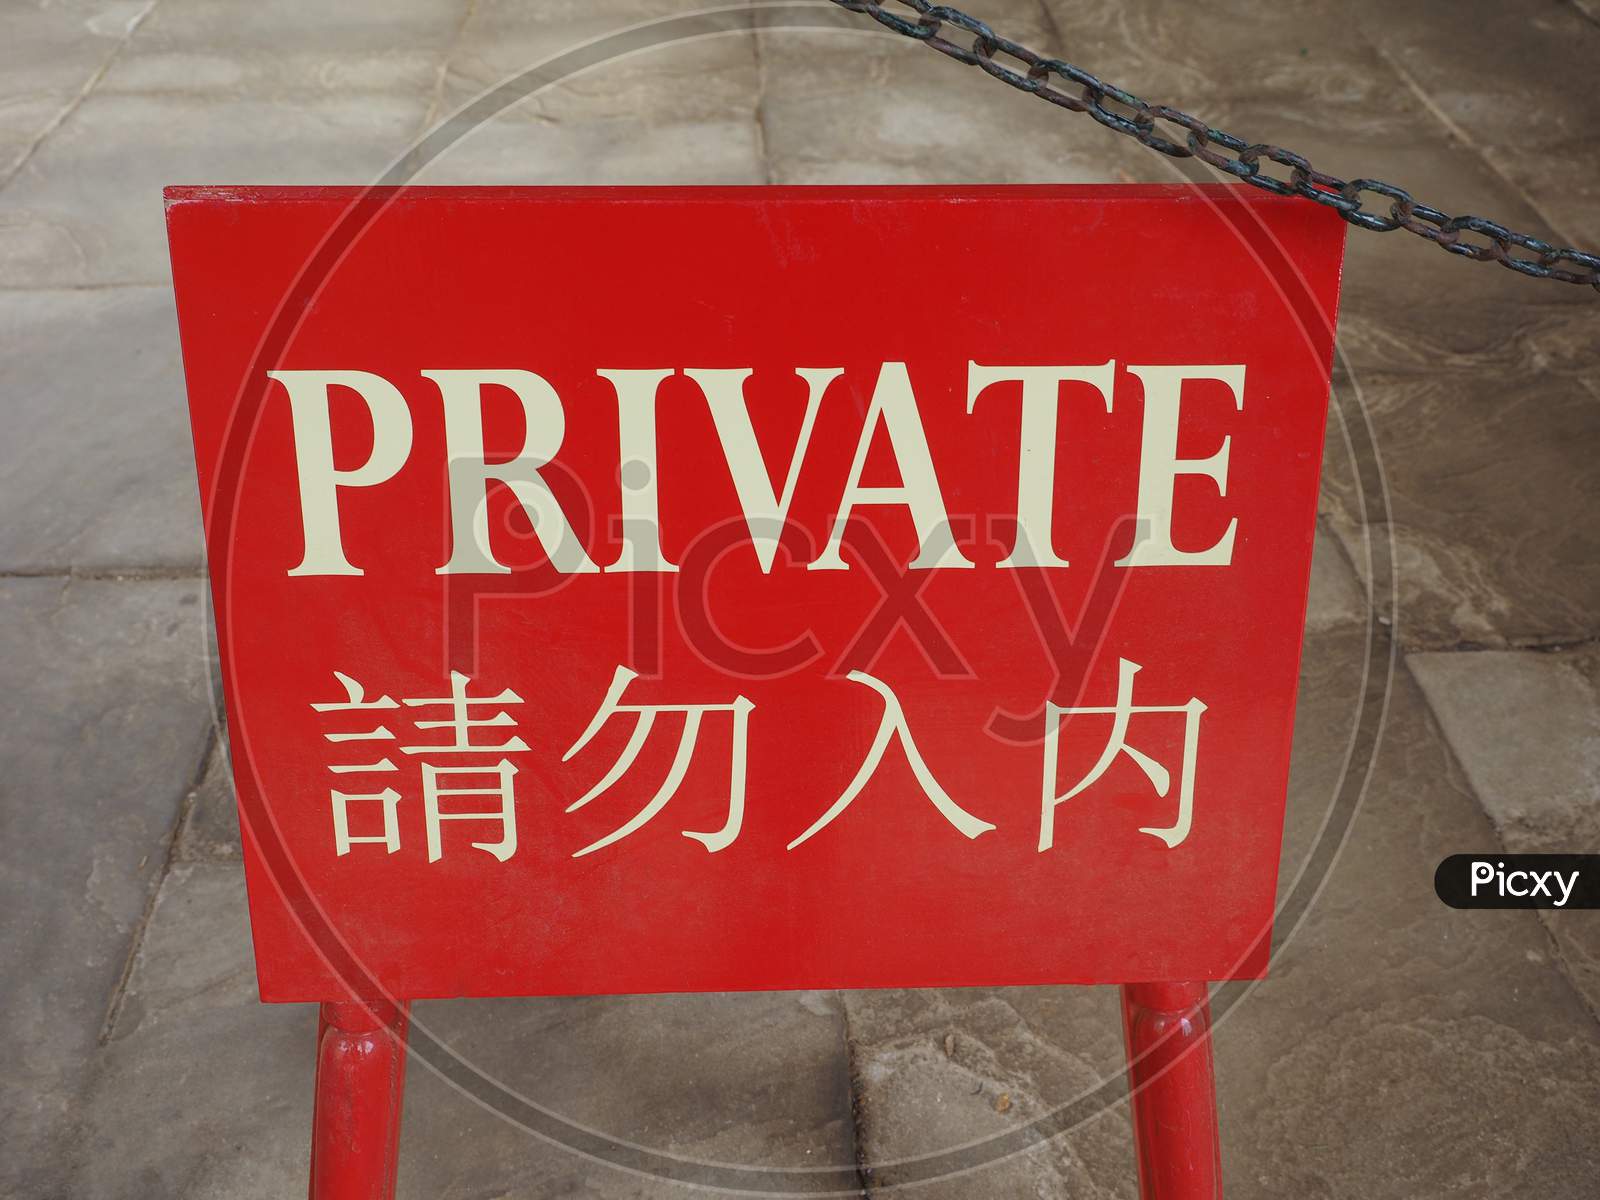 Private Sign In English And Chinese